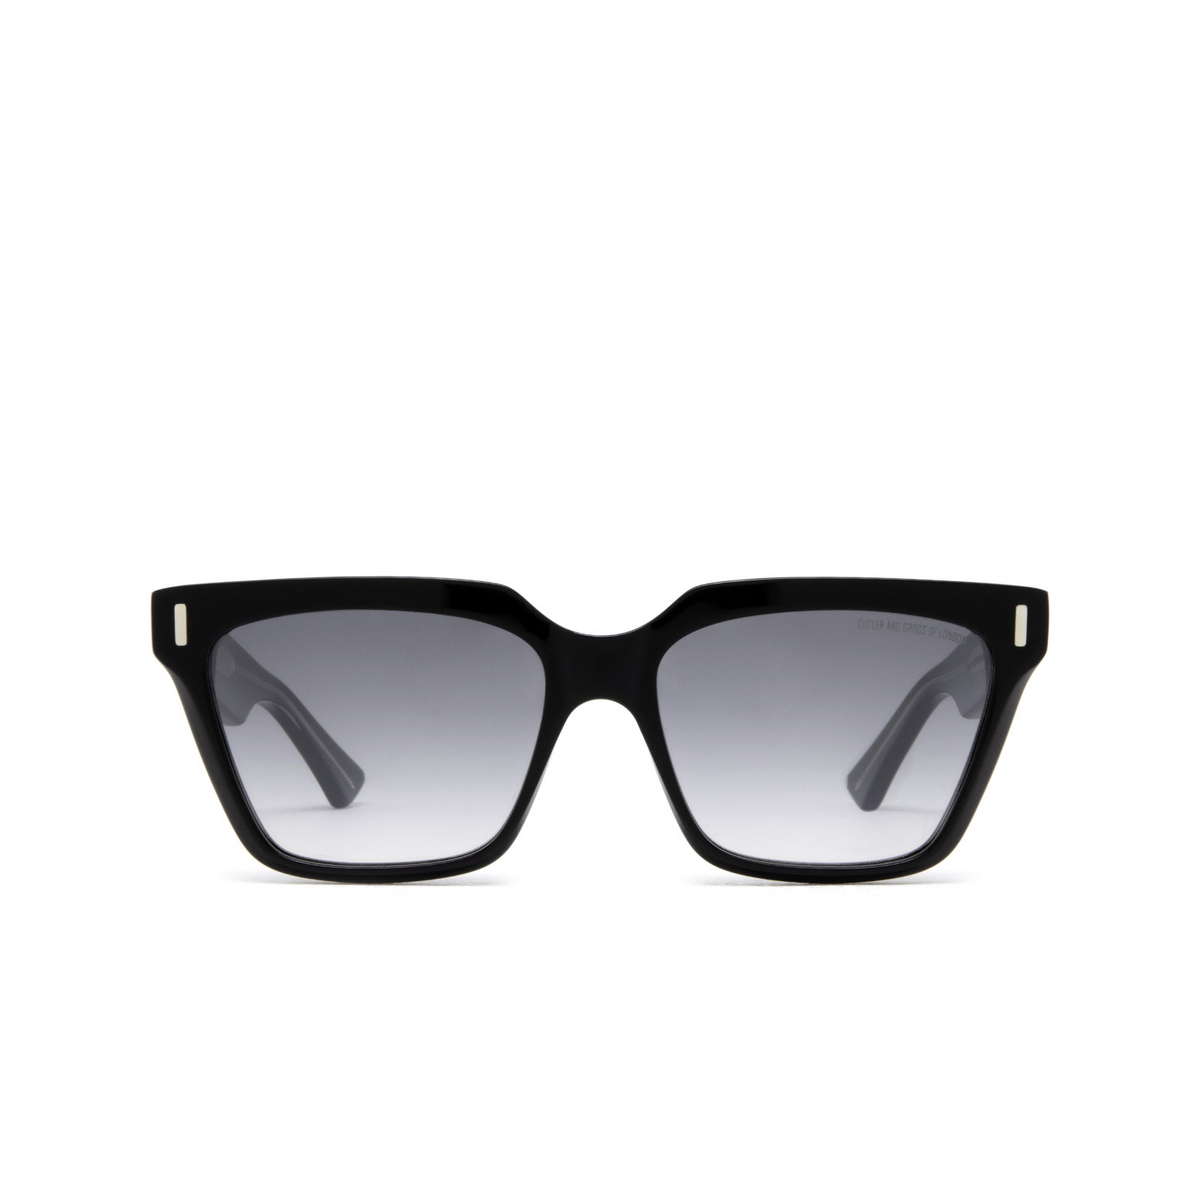 Cutler and Gross® Square Sunglasses: 1347 SUN color Black Taxi 01 - front view.